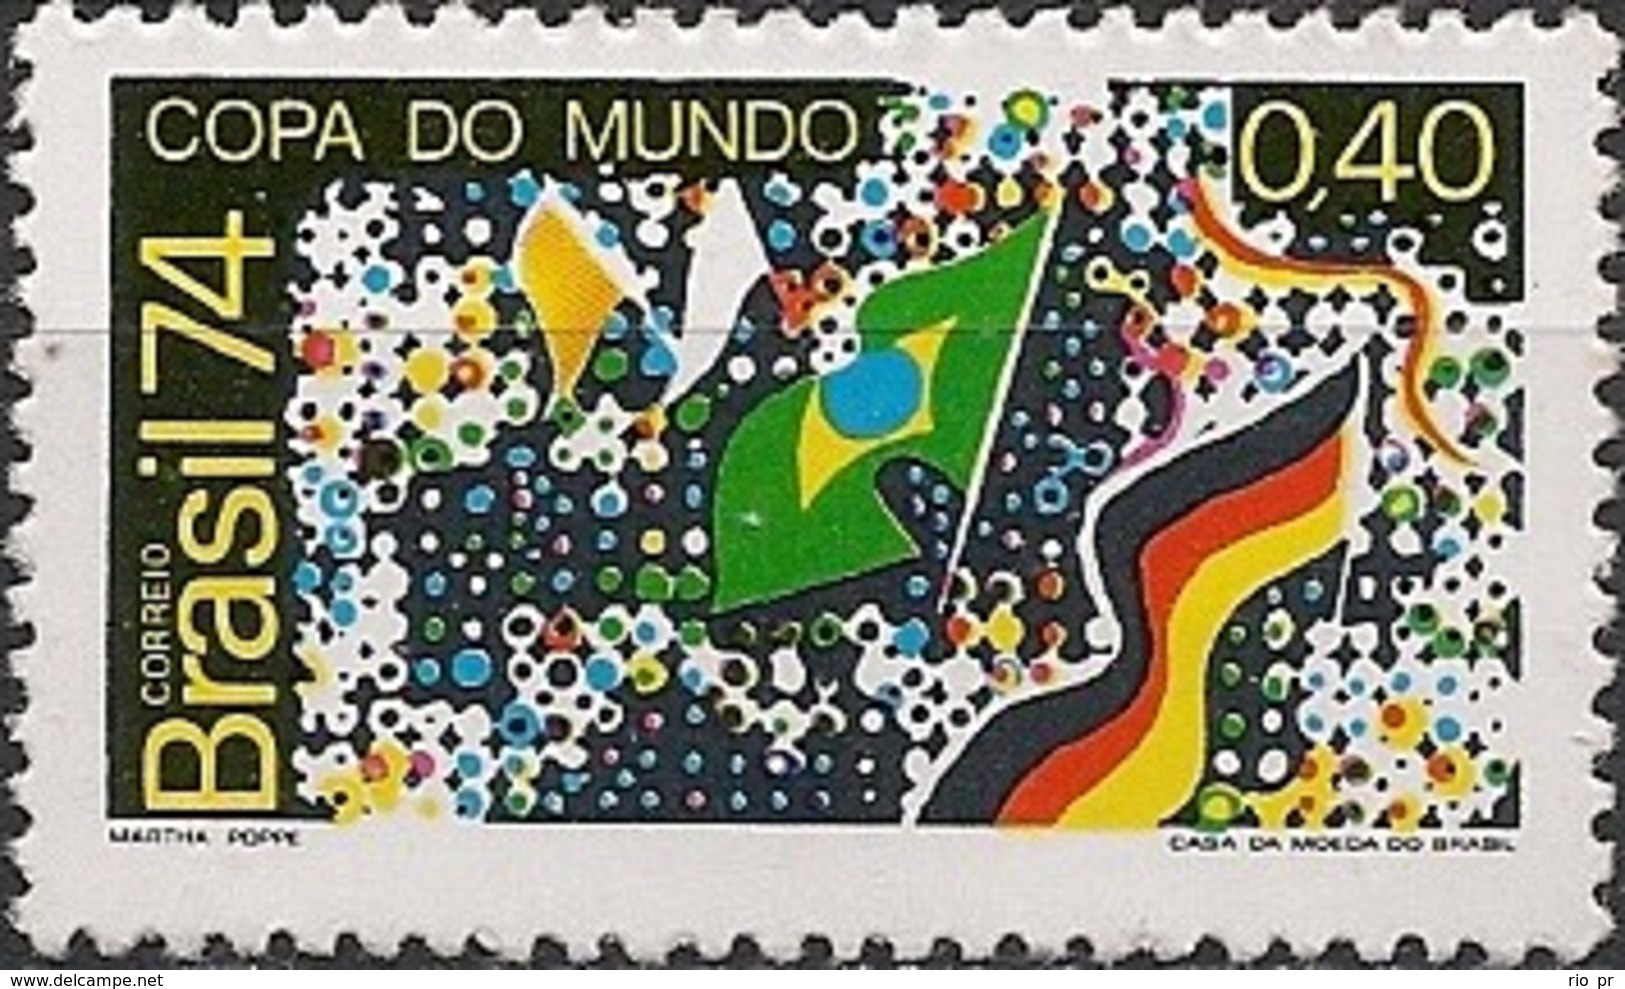 BRAZIL - WEST GERMANY'74 FIFA WORLD SOCCER CUP 1974 - MNH - 1974 – West Germany